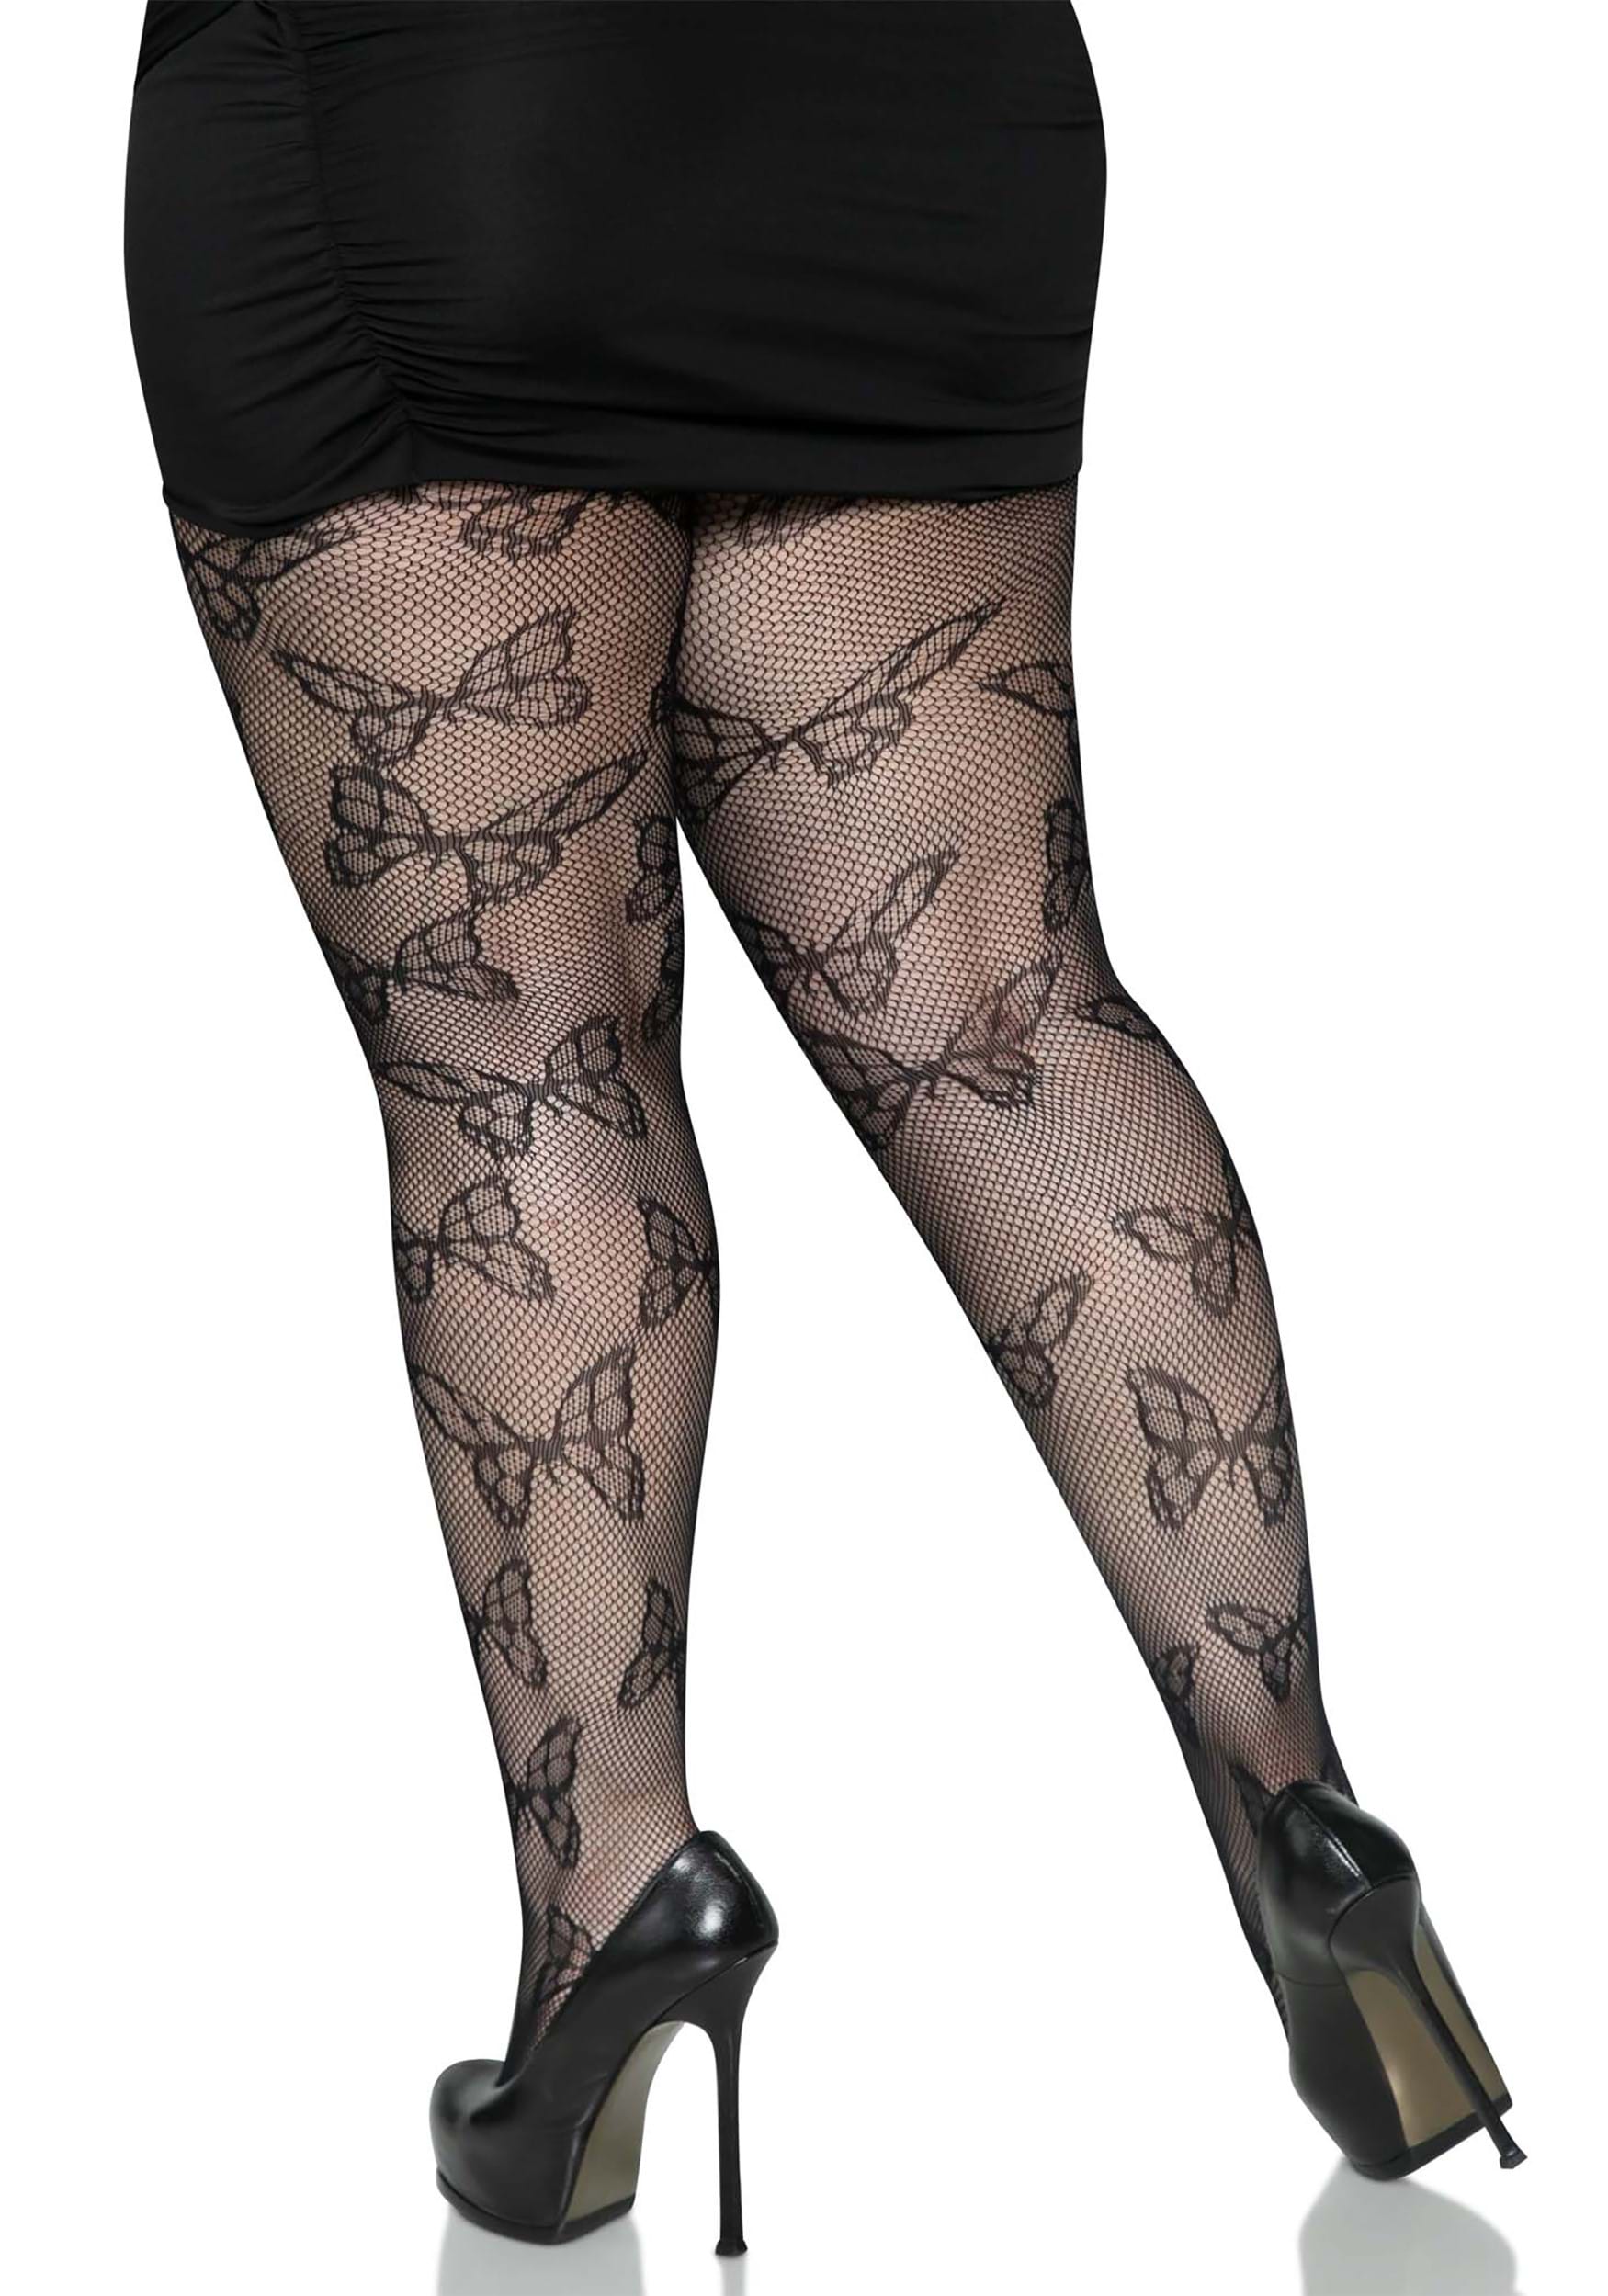 https://images.halloween.com/products/82969/2-1-234675/plus-size-black-butterfly-net-tights-alt-1.jpg